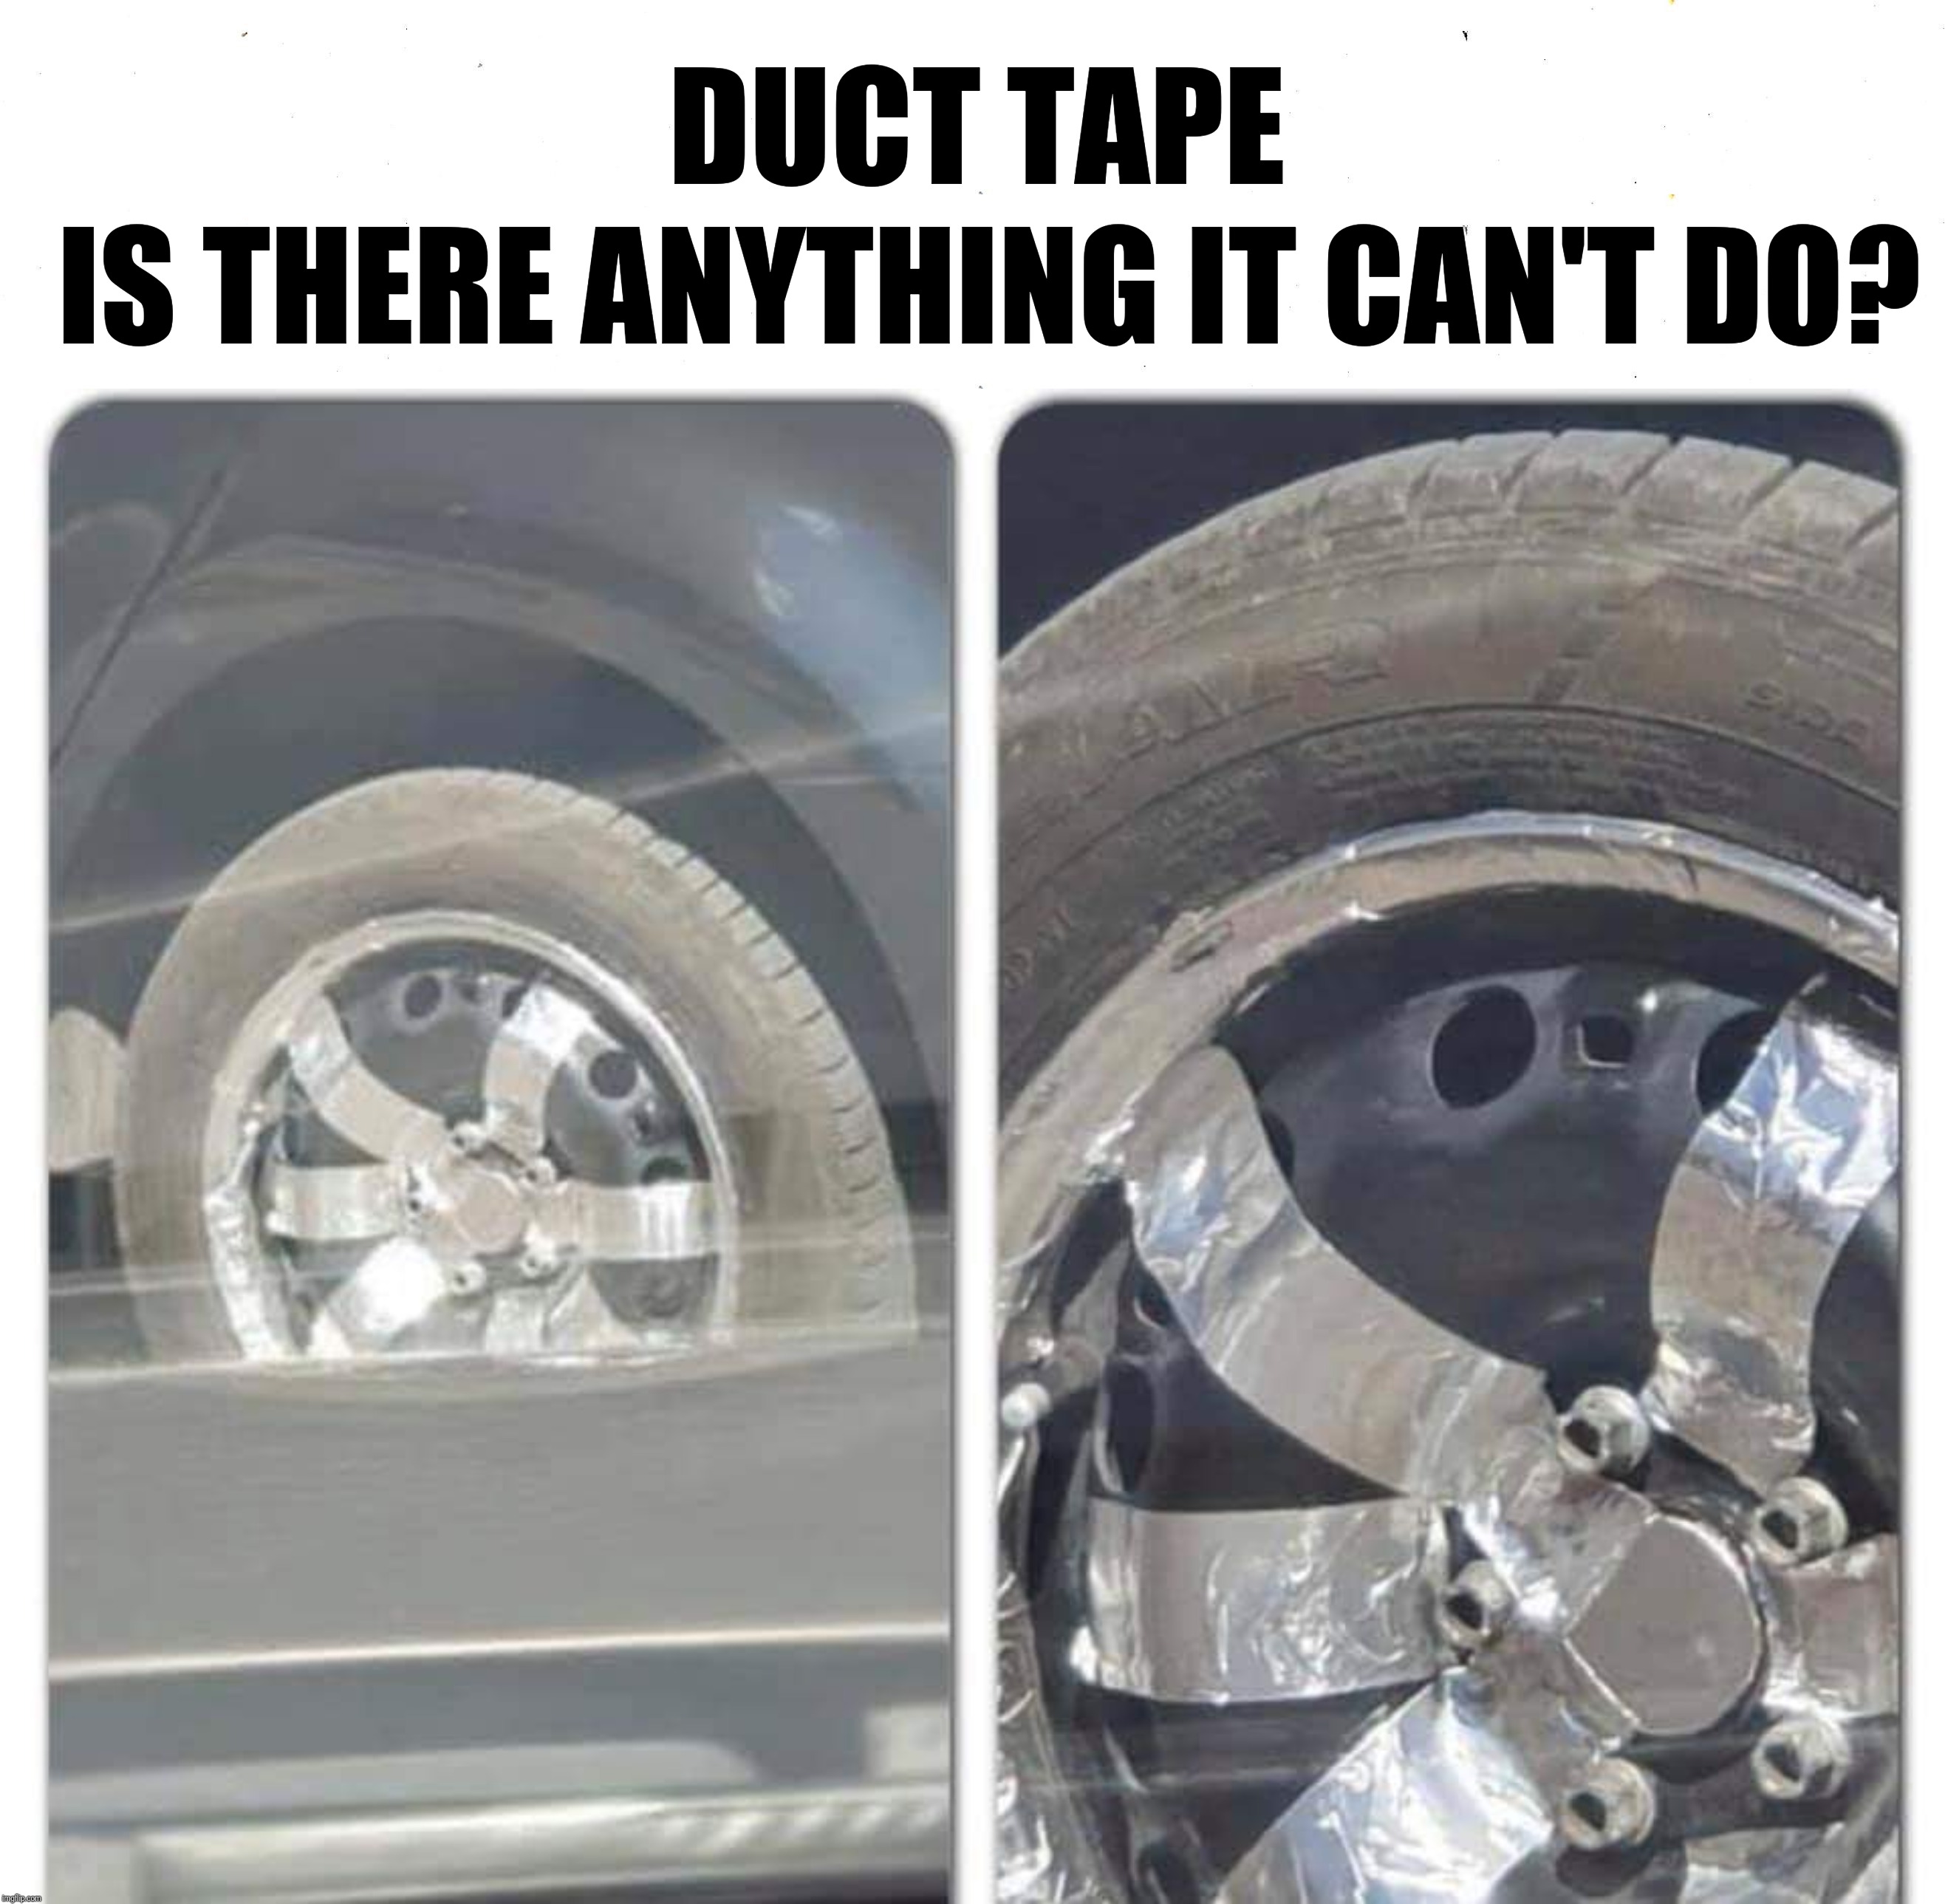 If they don't find you handsome | DUCT TAPE; IS THERE ANYTHING IT CAN'T DO? | image tagged in memes,funny memes,super,cars,duct tape,derp | made w/ Imgflip meme maker